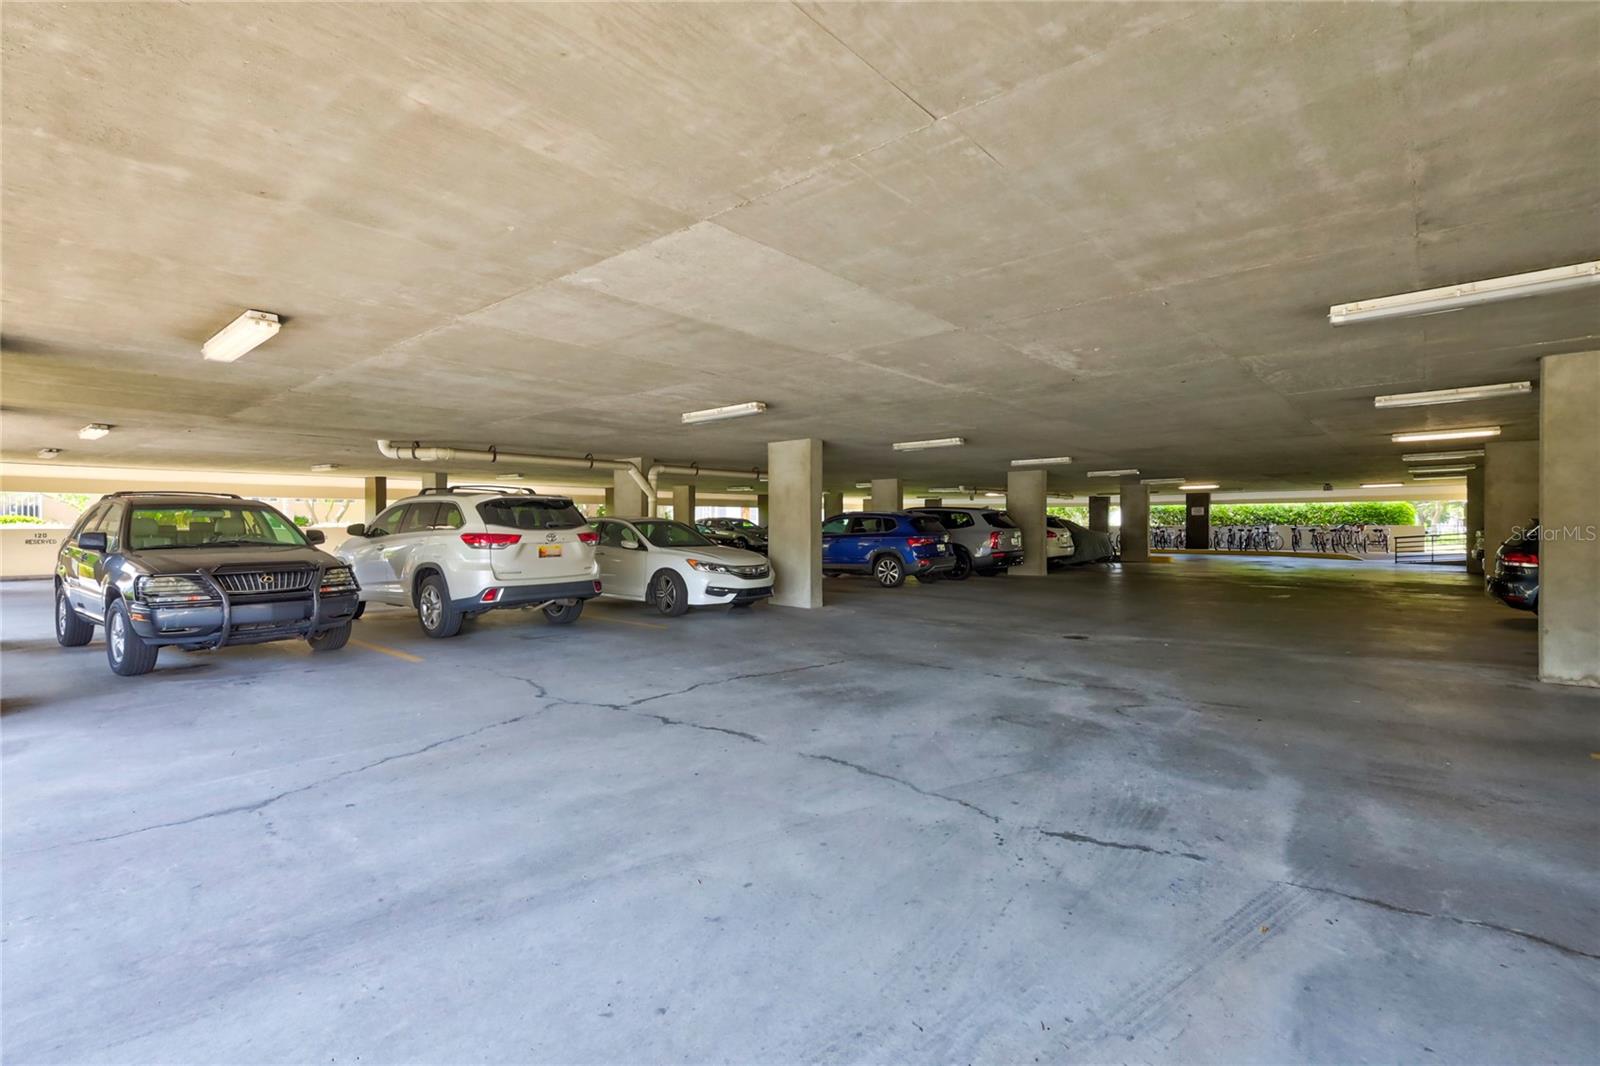 One story Garage with bike racks, open walk way exclusive for buildings A ad B to Clubhouses, private pool and spa. Also from garage, closet with grocery carts, covered, wide walk way to keyed lobby.